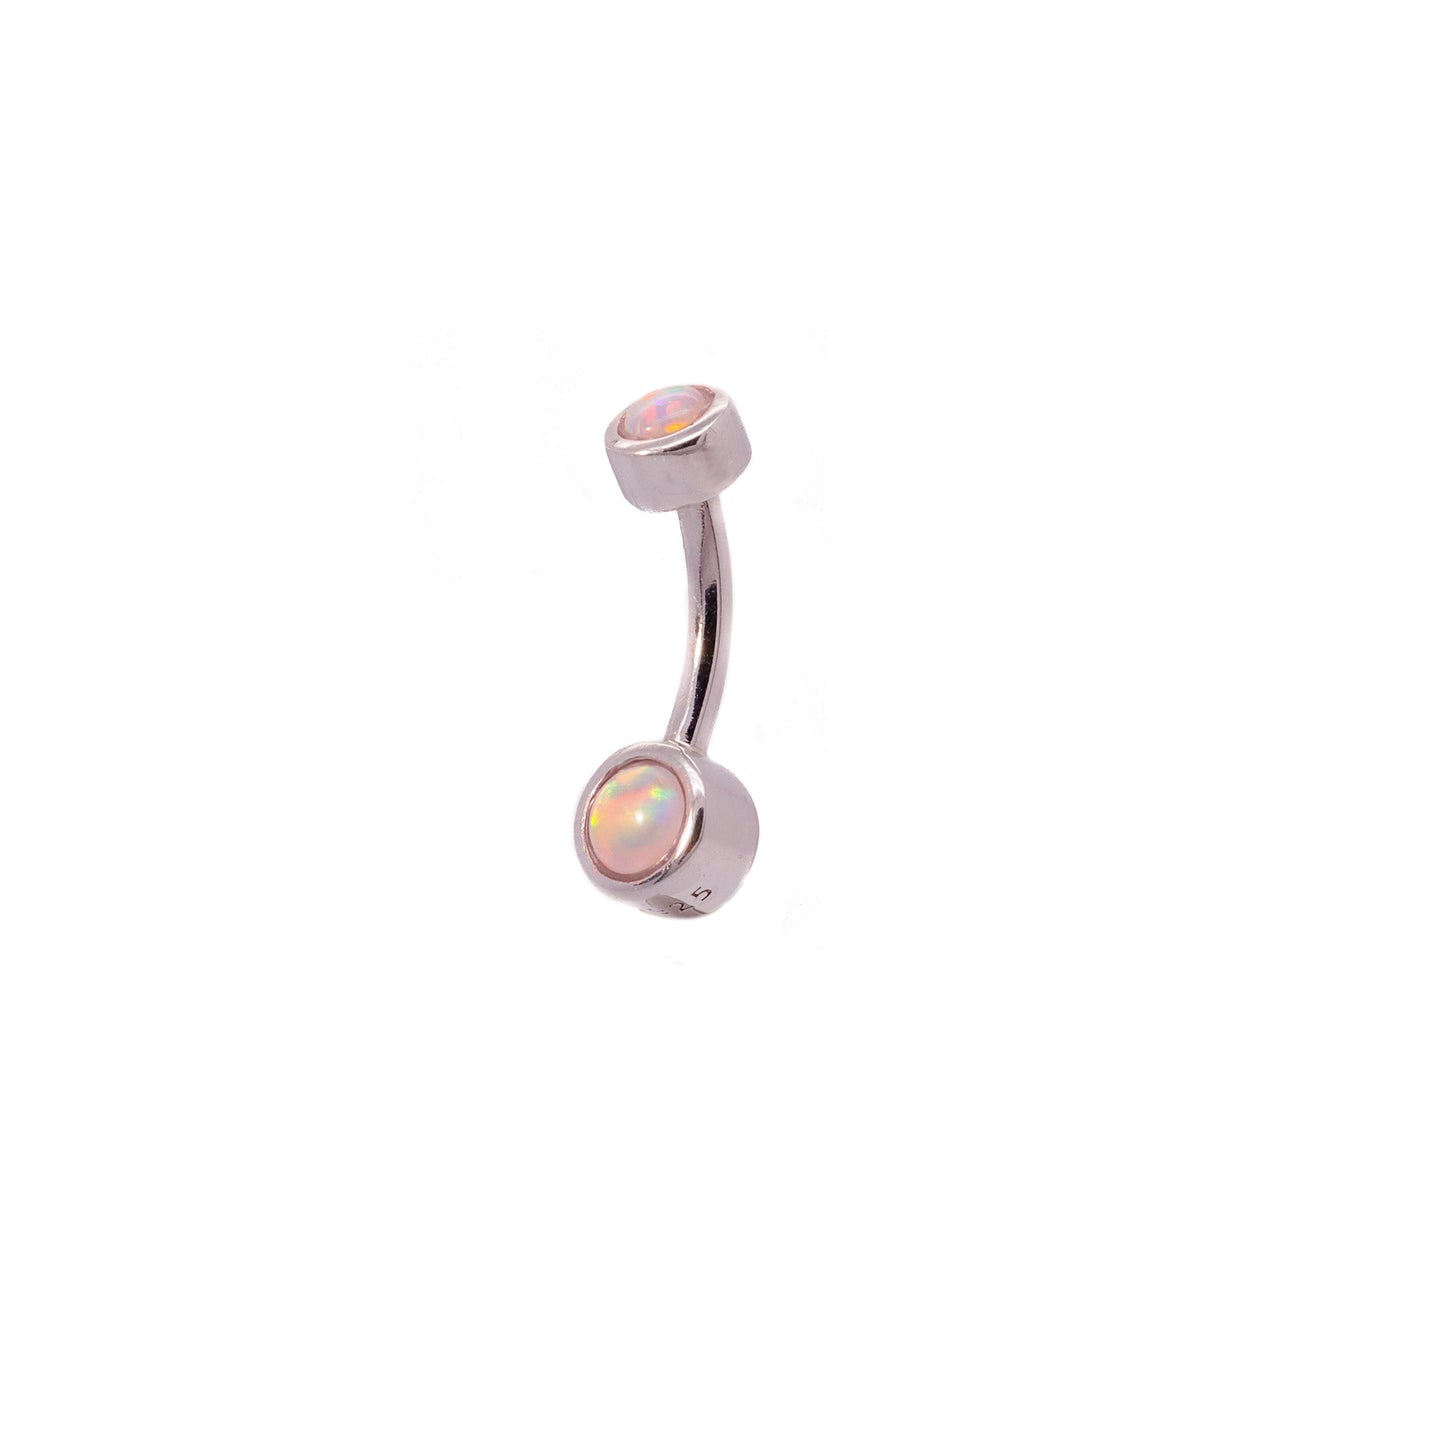 Solid 925 Silver | 14G Tiny Pink Kyocera Galaxy Opal Belly Ring | 6mm 1/4" 8mm 5/16" 10mm 3/8" - Sturdy South